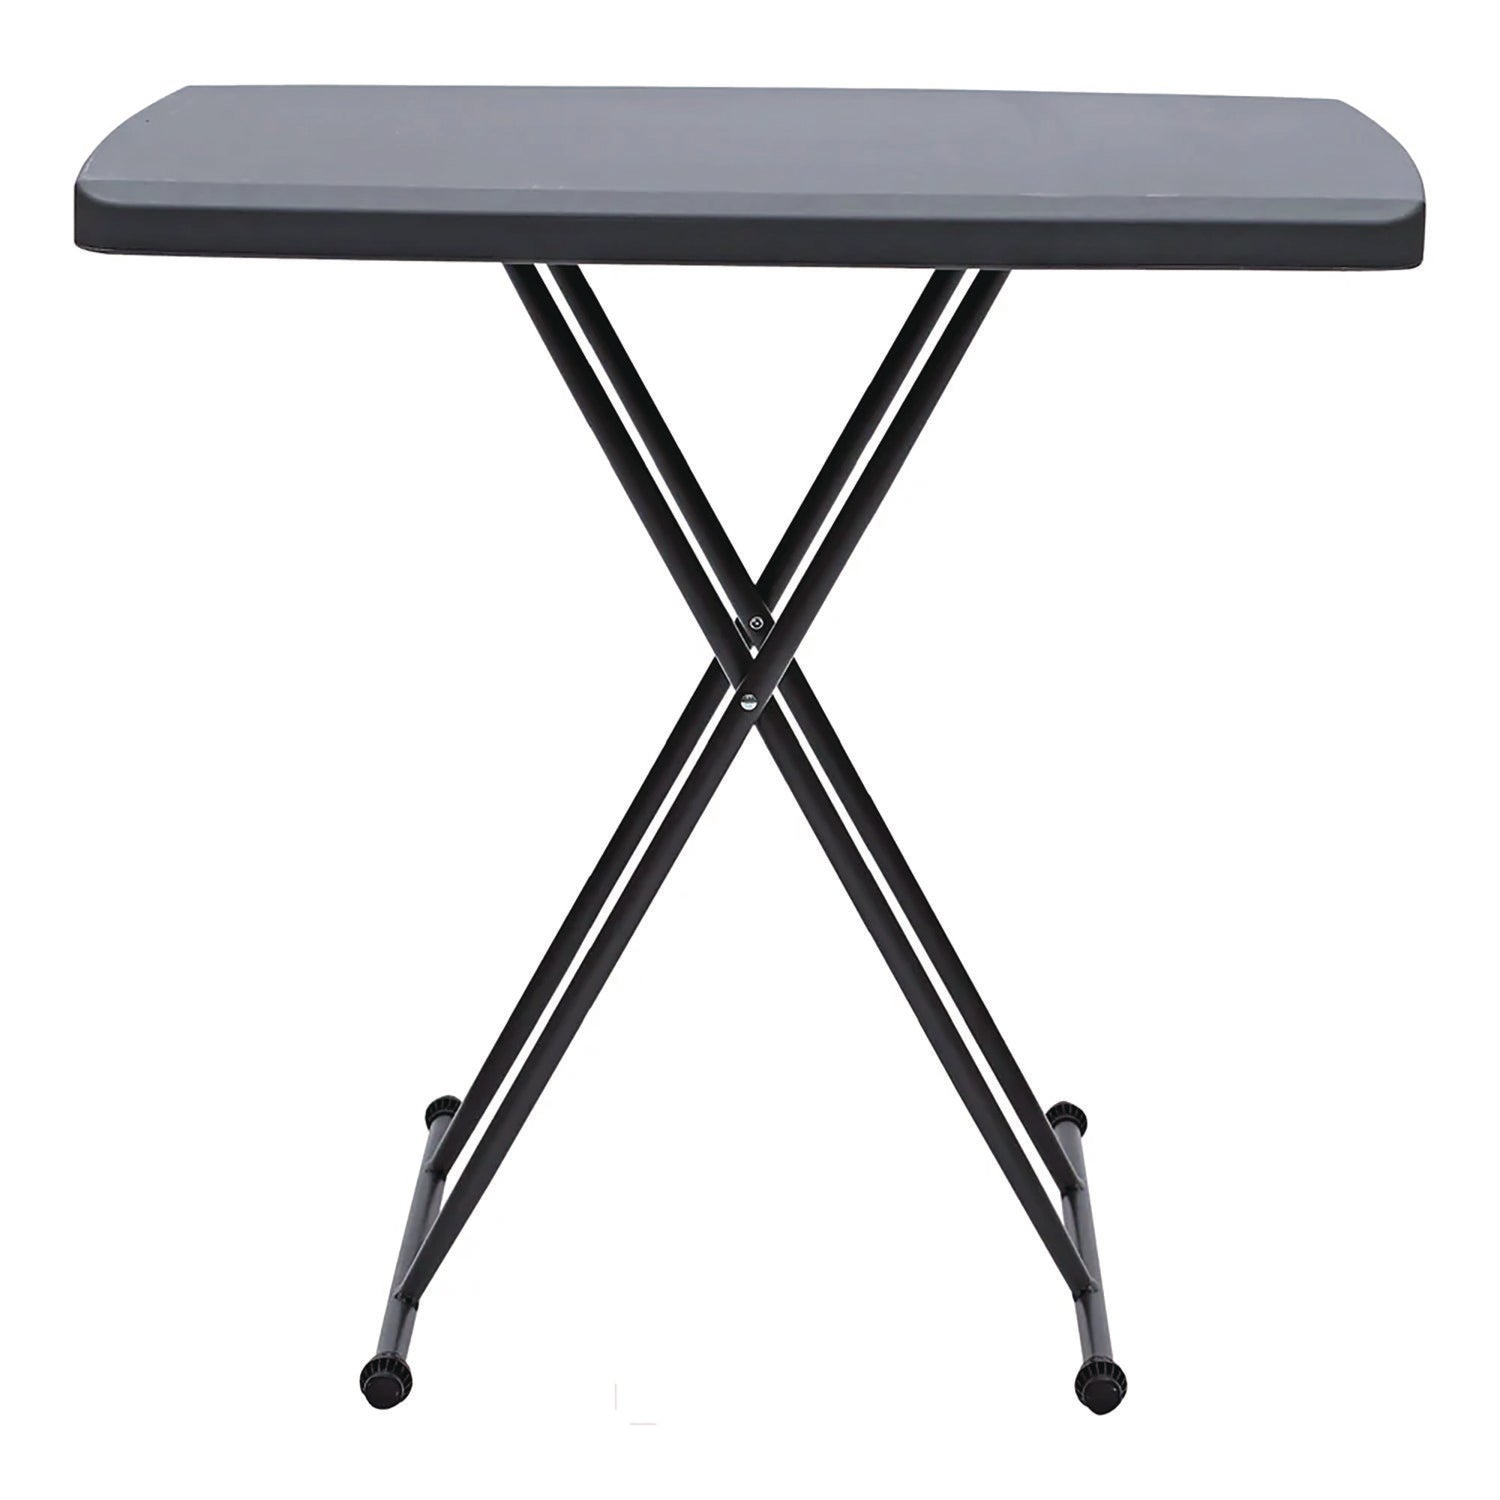 IndestrucTable Classic Personal Folding Table, 30" x 20" x 25" to 28", Charcoal - 5